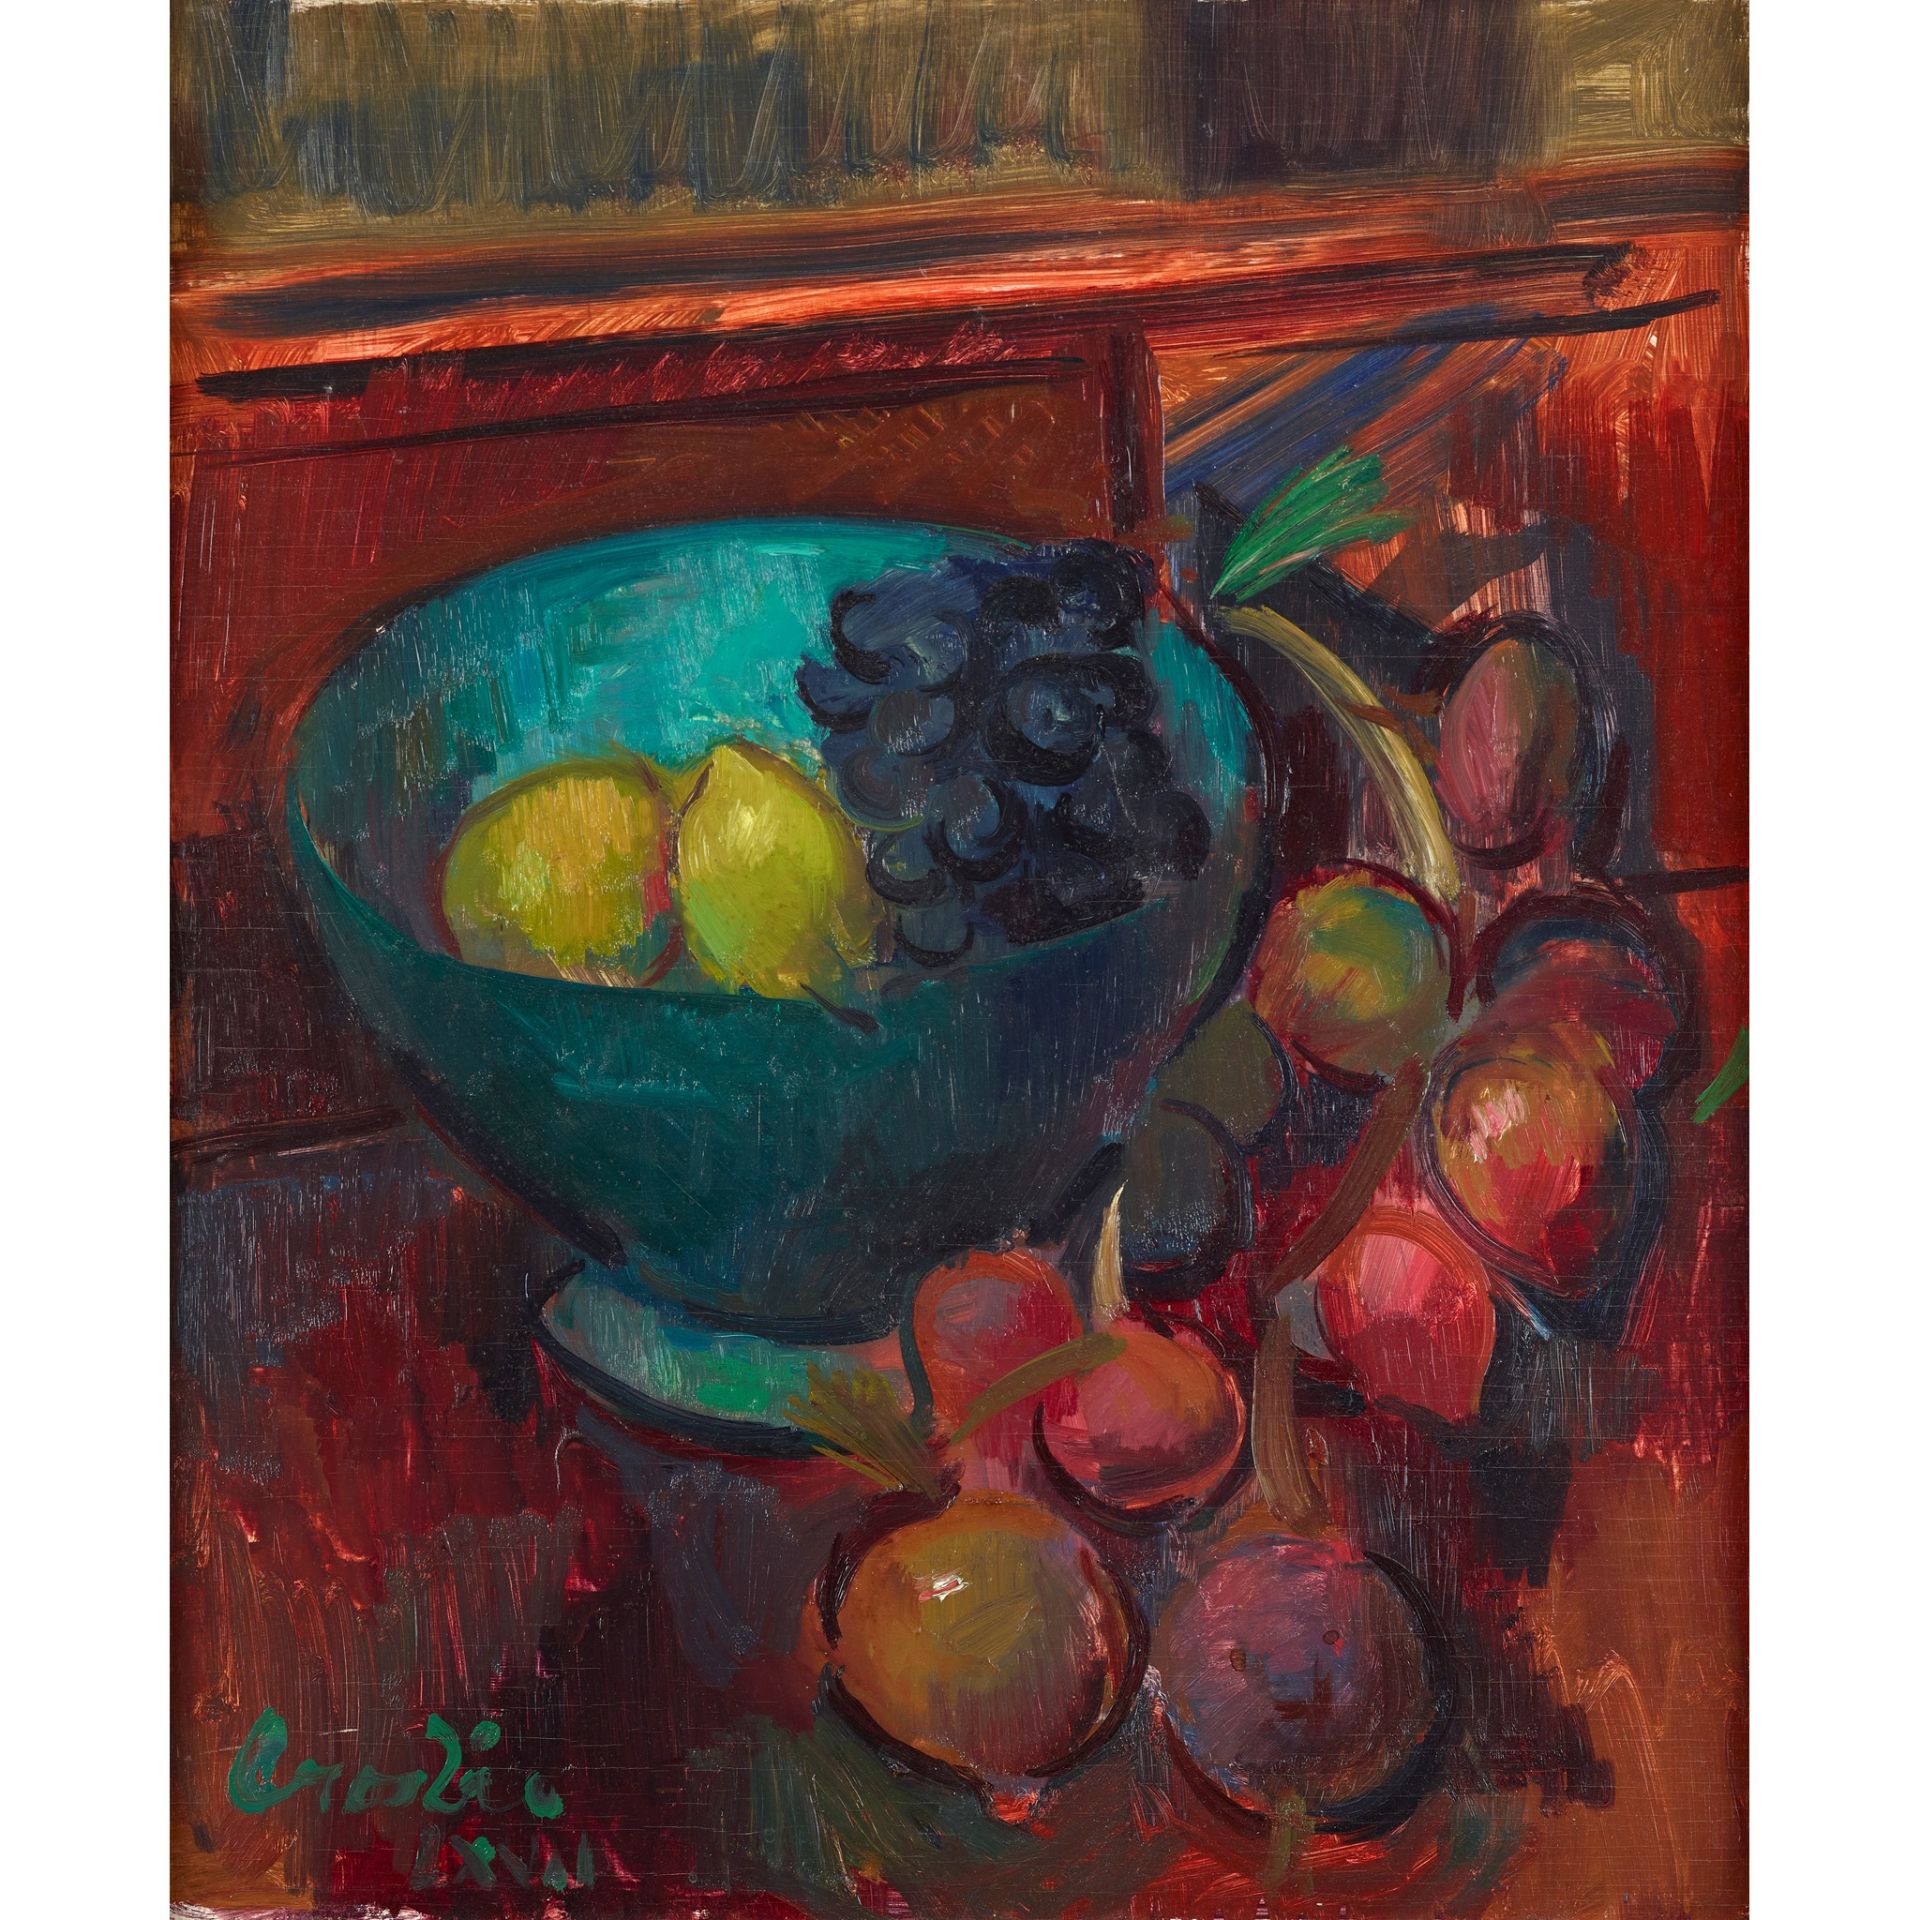 § WILLIAM CROSBIE R.S.A. (SCOTTISH 1915-1999) STILL LIFE WITH BOWL OF LEMONS